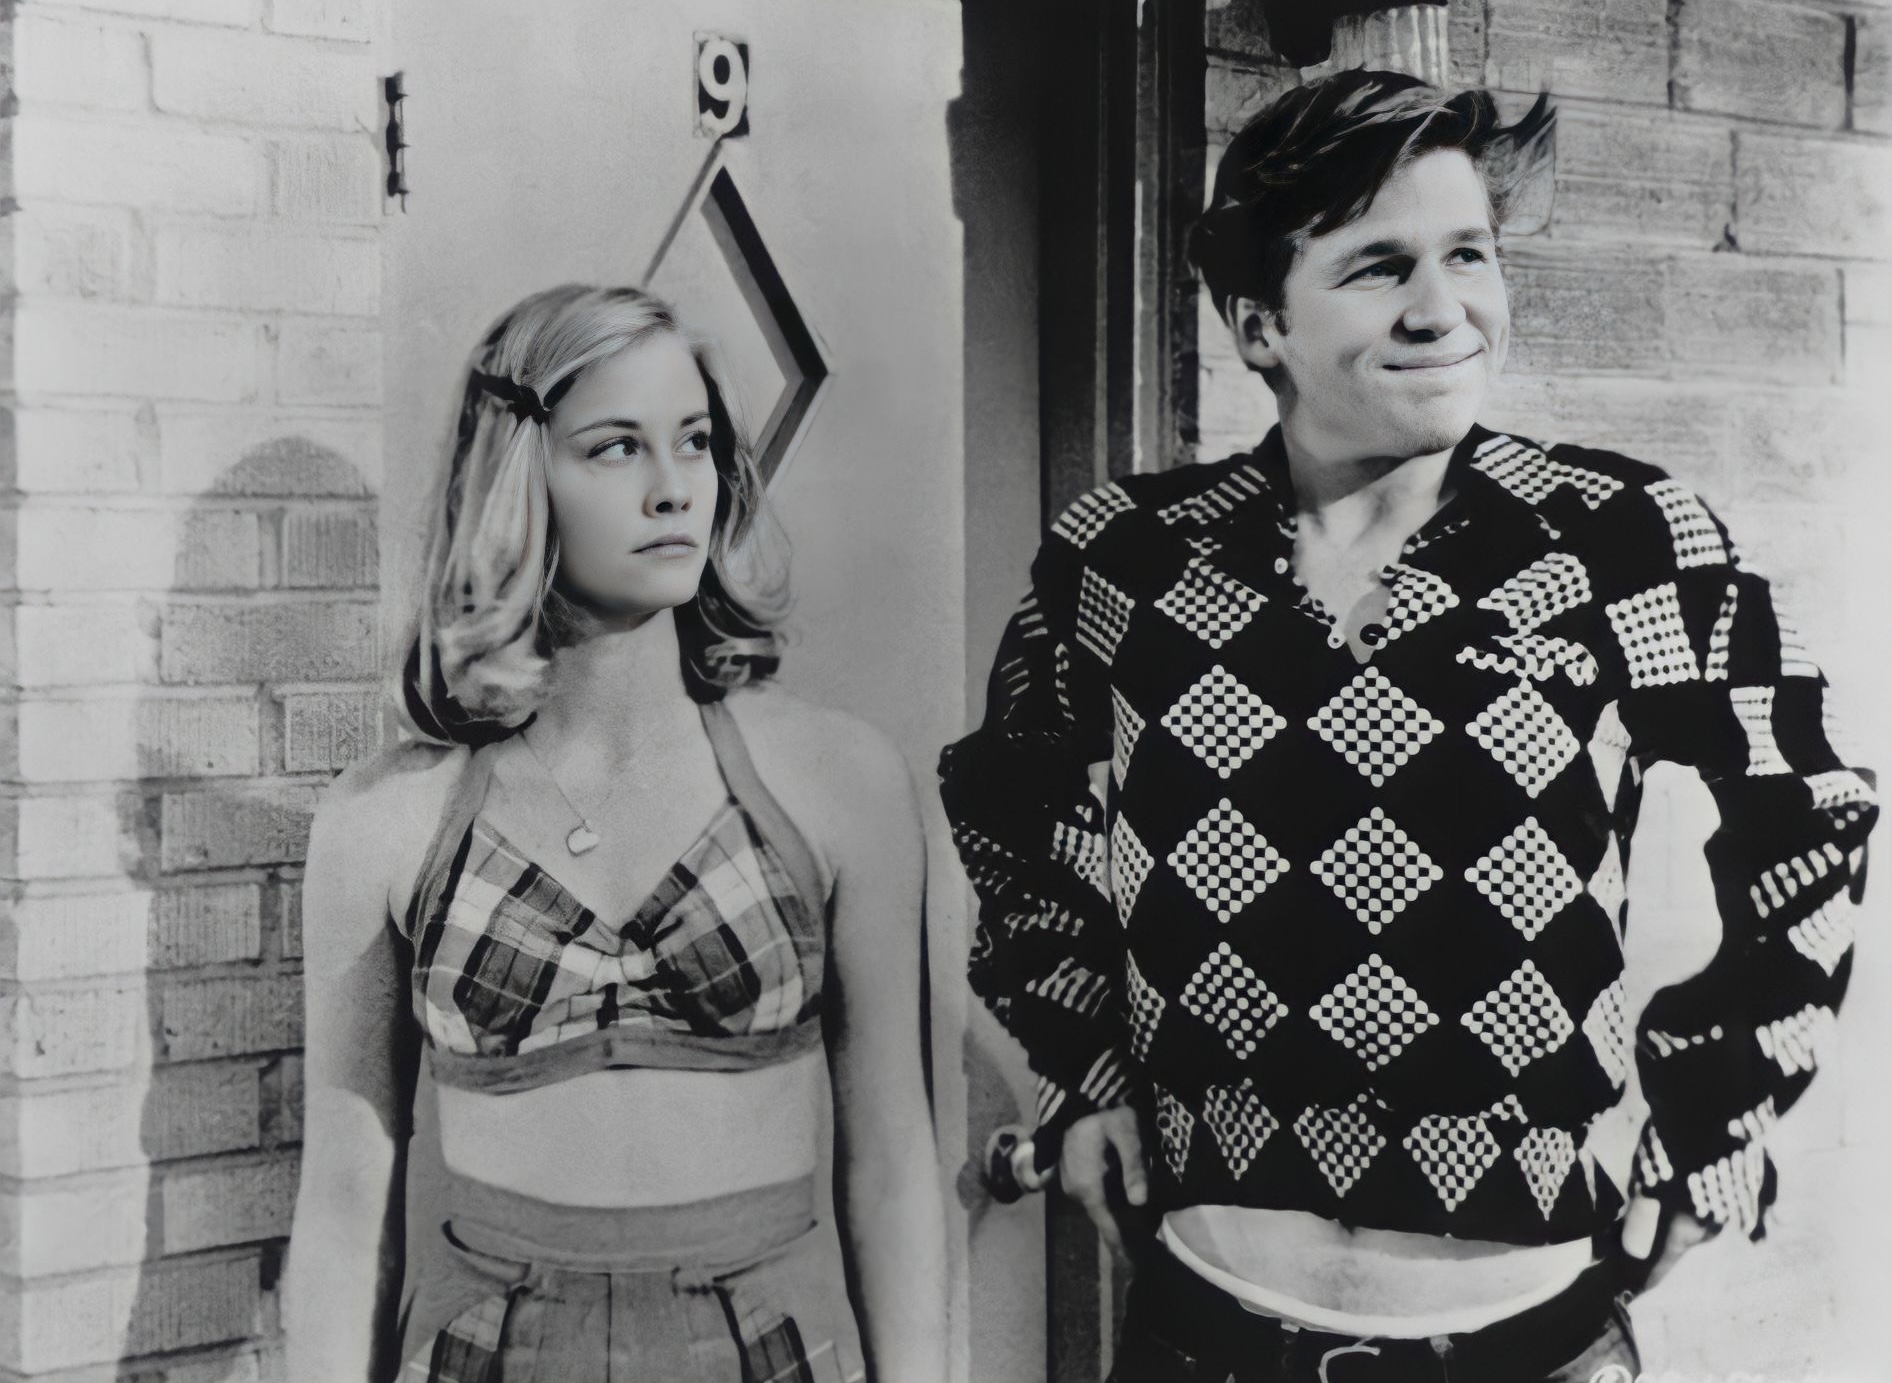 Cybill Shepherd and Jeff Bridges in “The Last Picture Show”